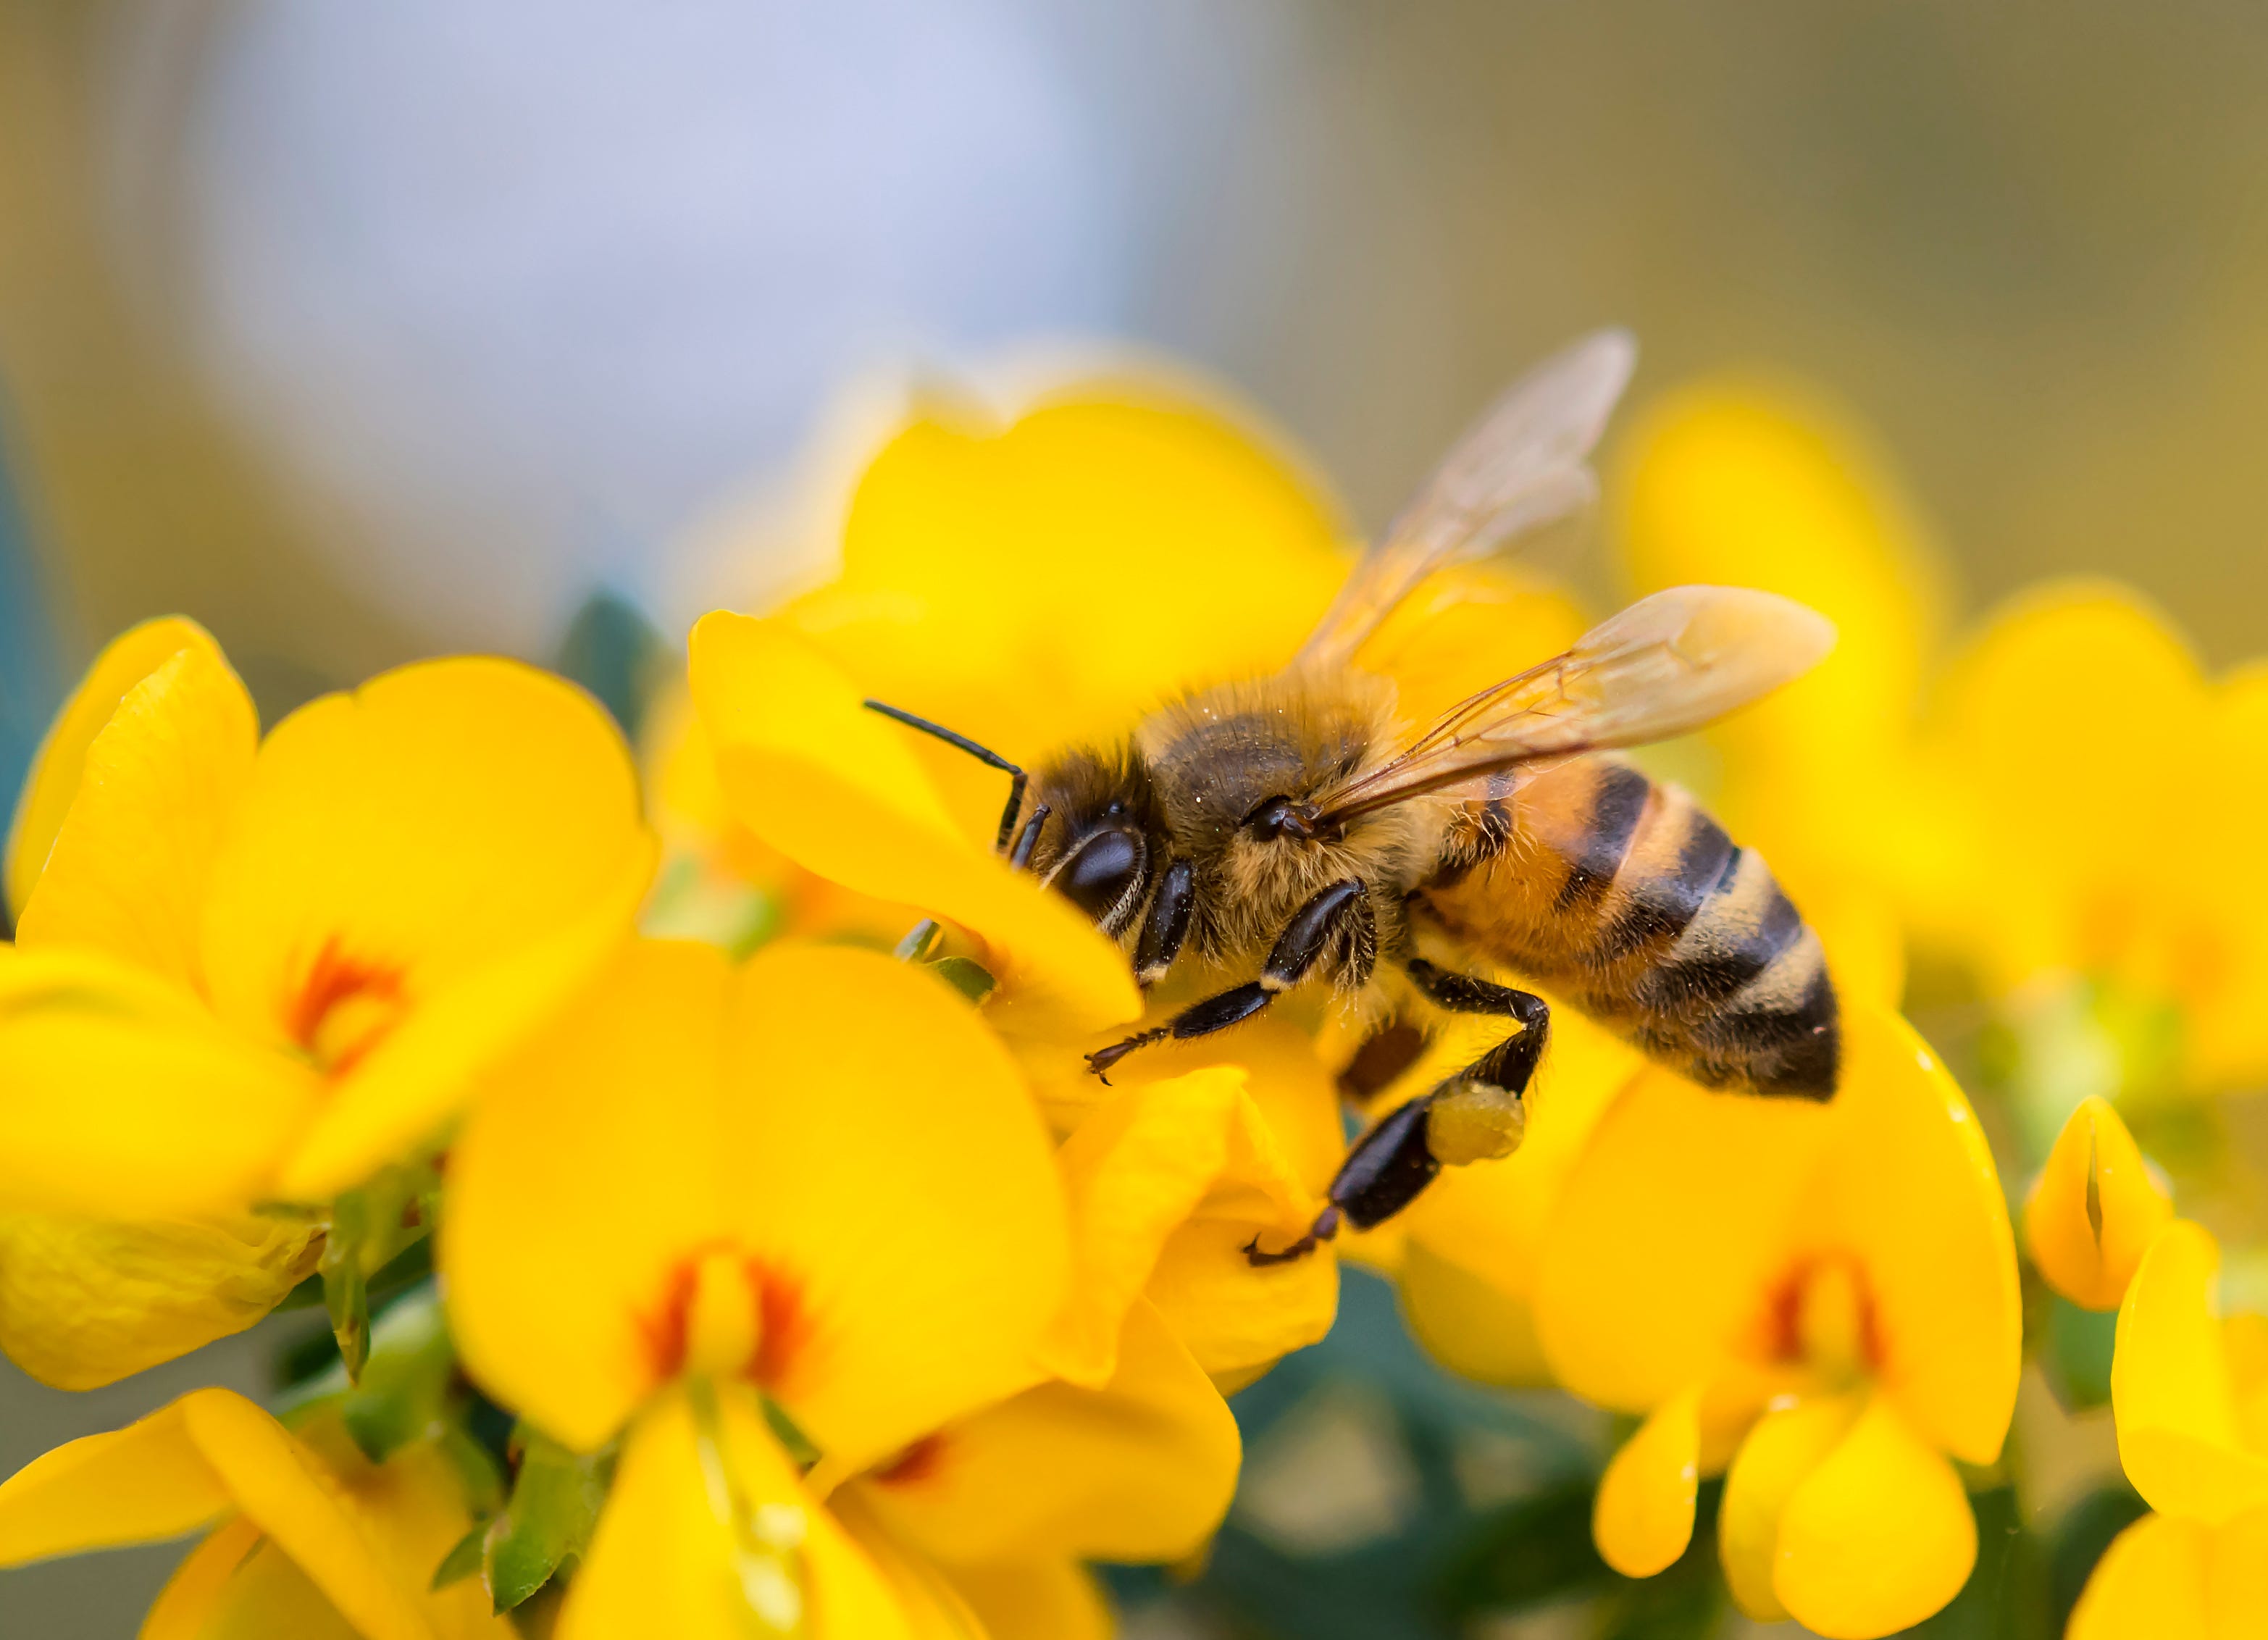 Honeybees are in trouble. Here's how you can help